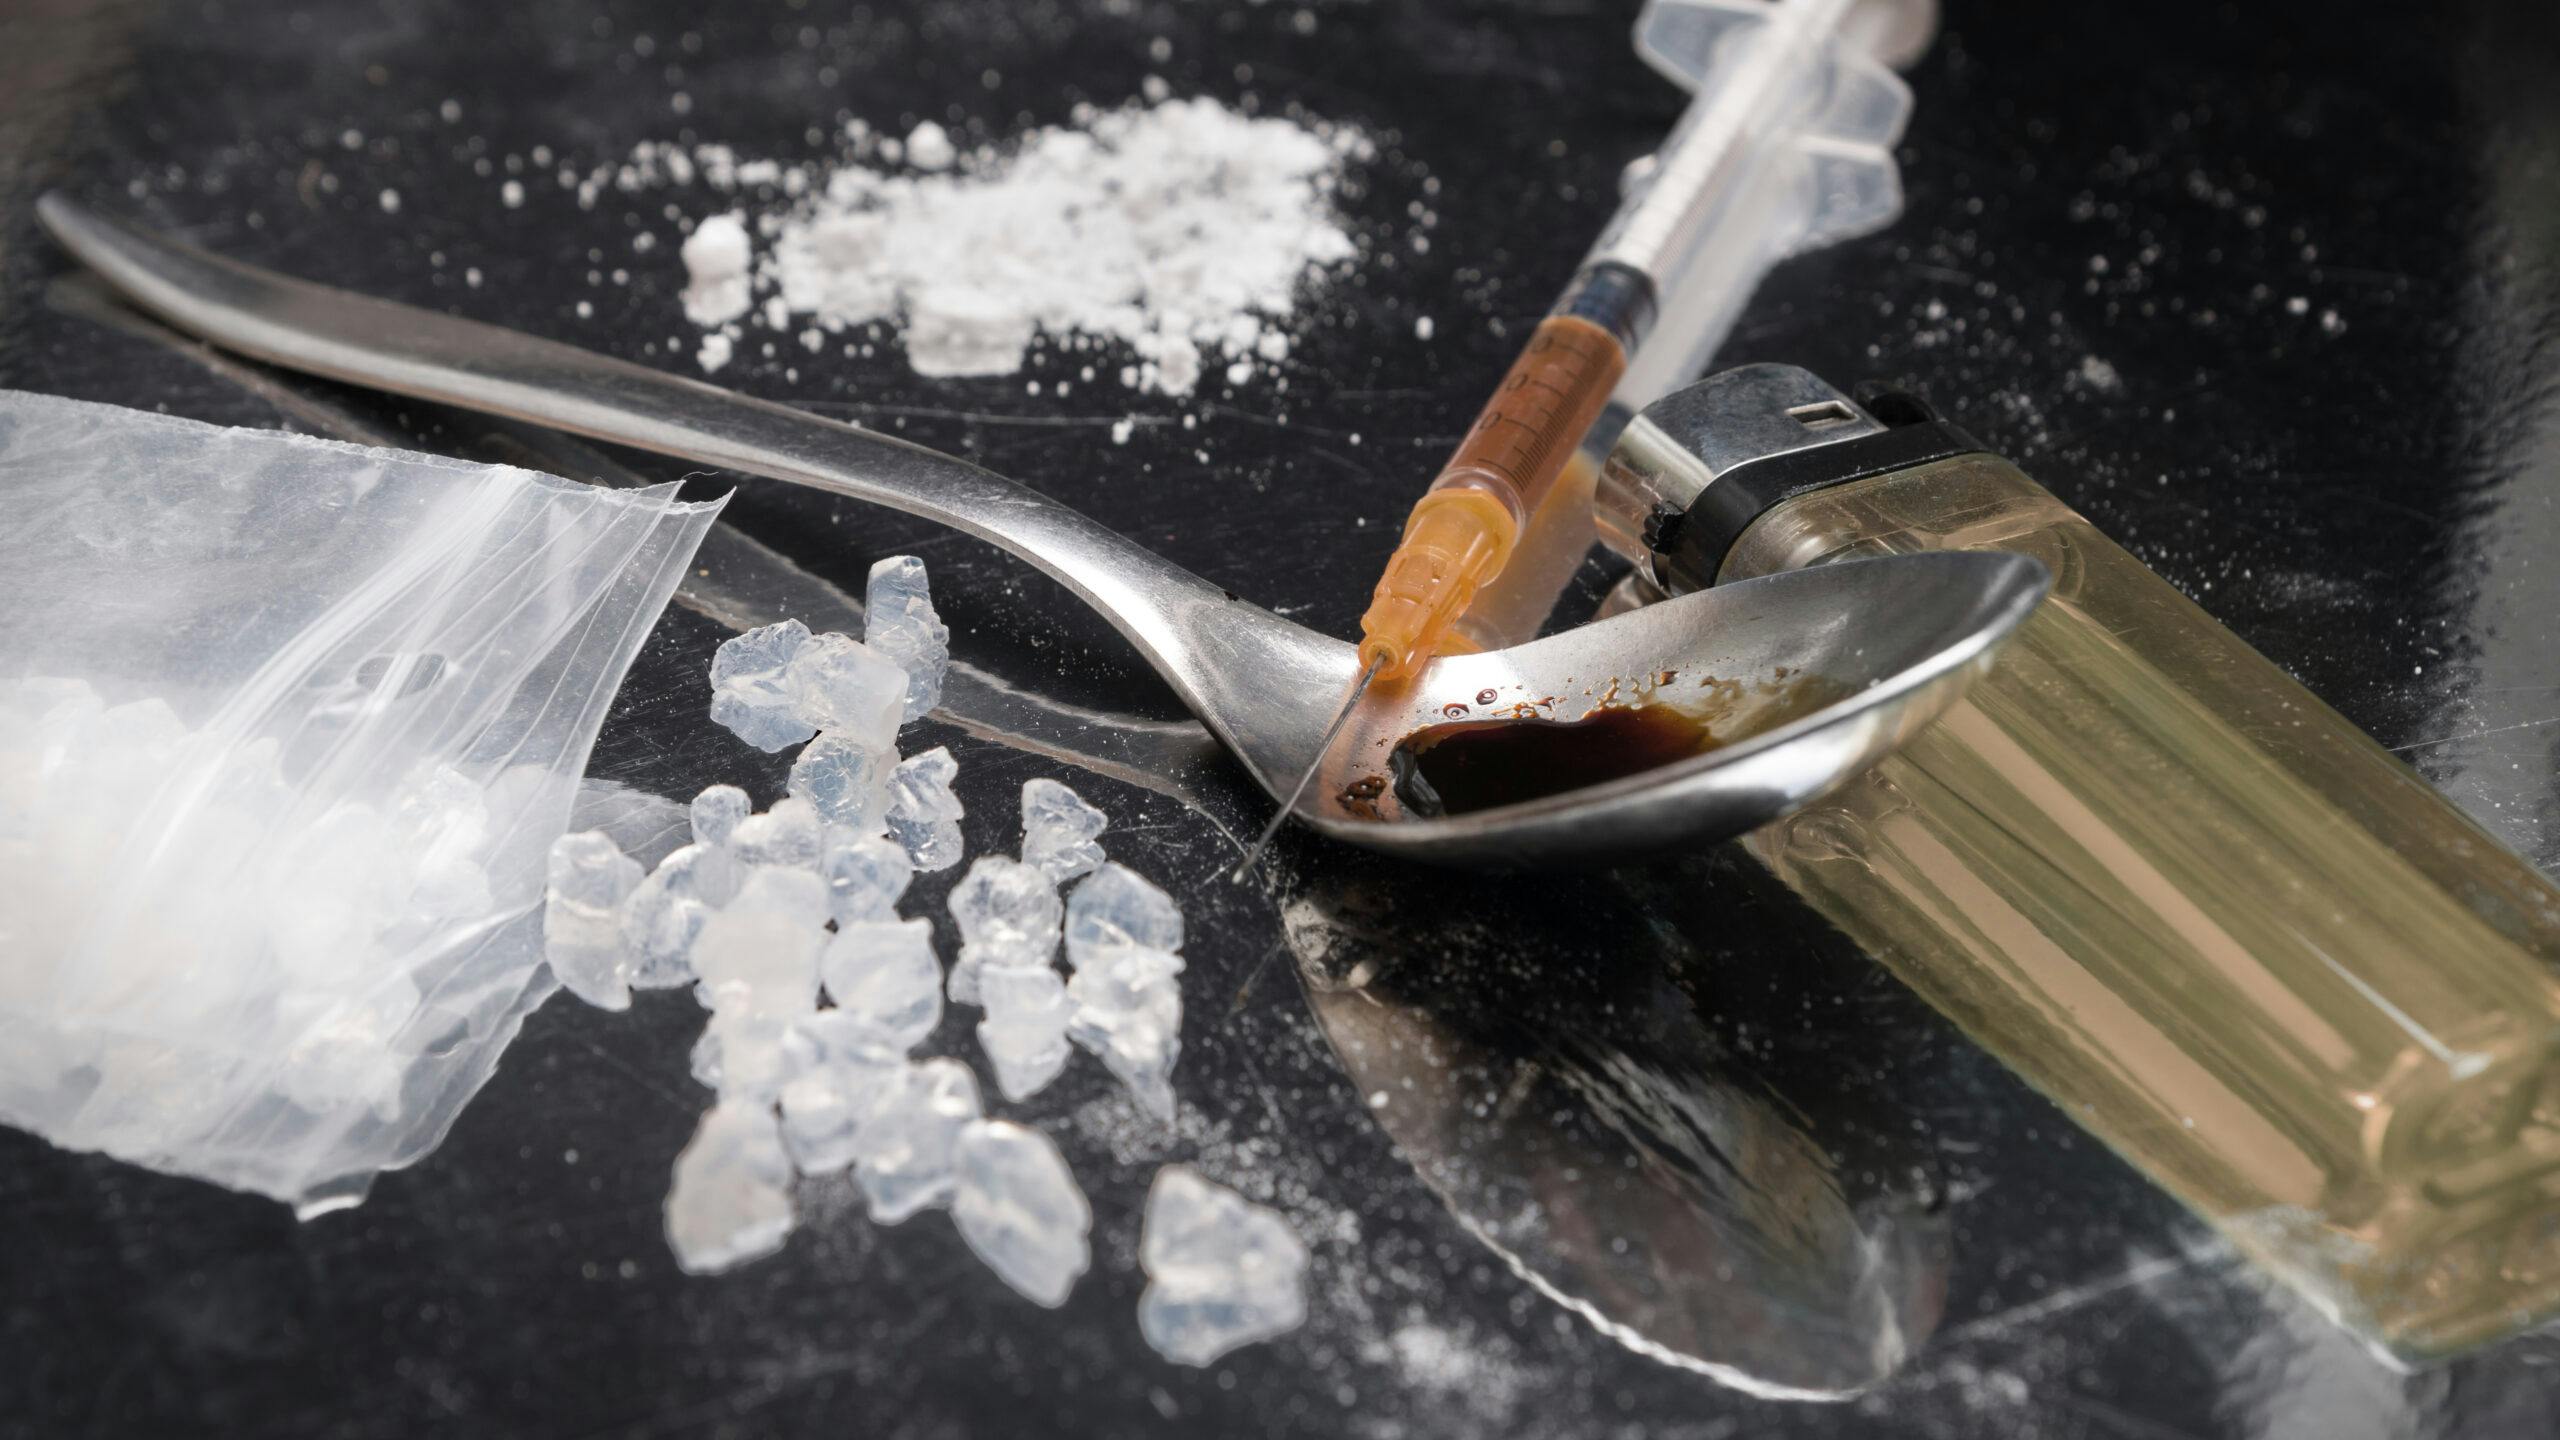 crystal meth and powder with heroin syringe